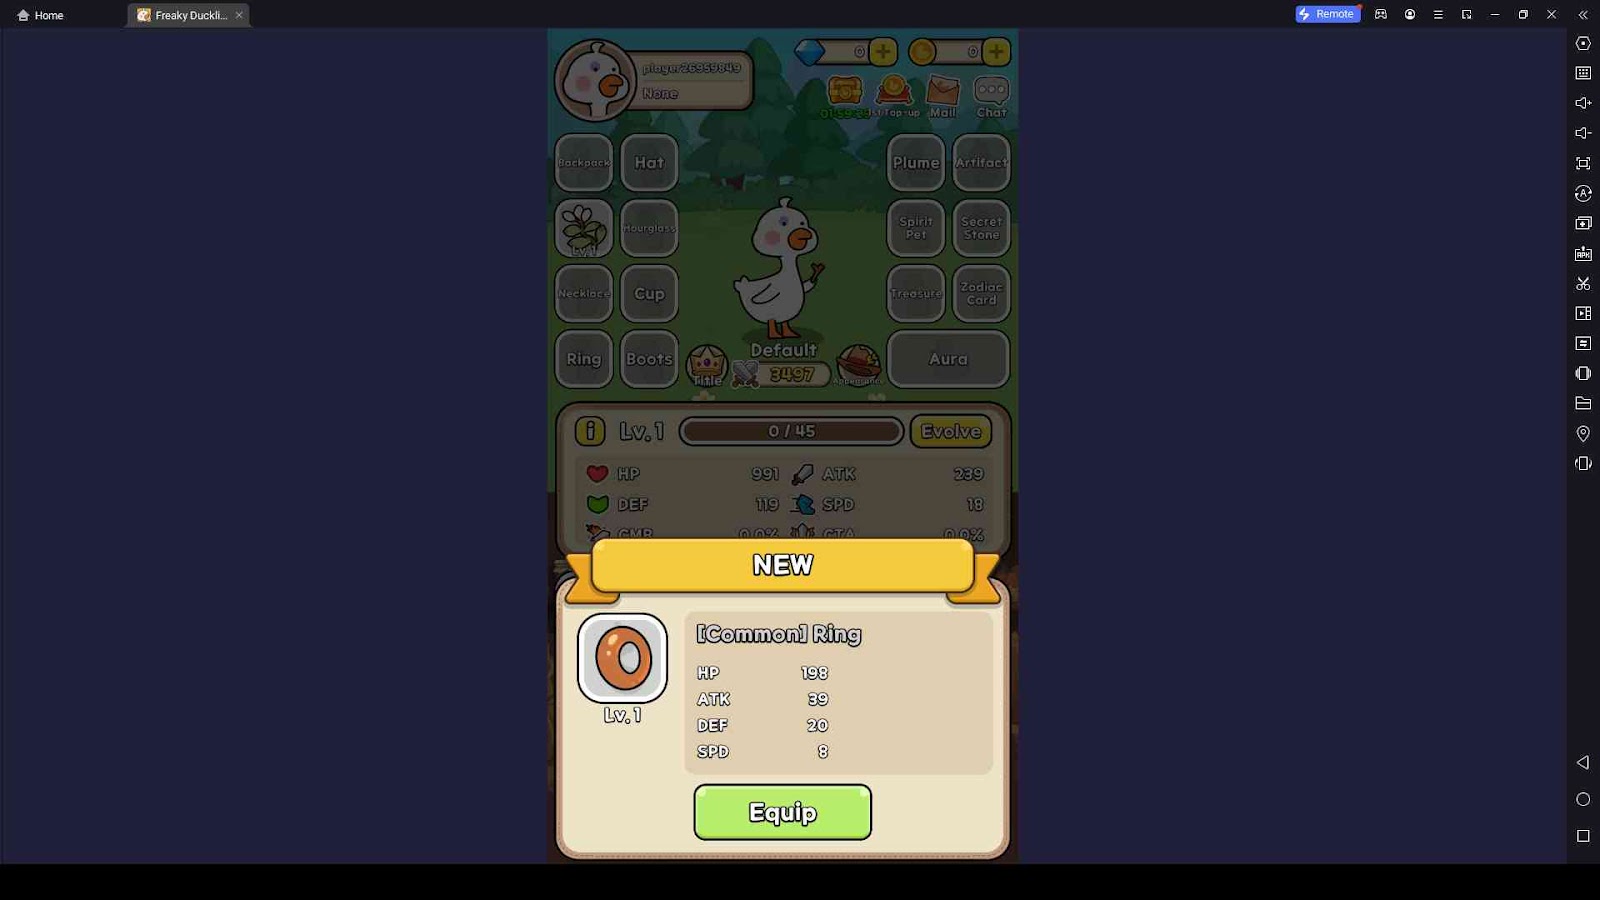 Incubate Duck Eggs for Powerful Items